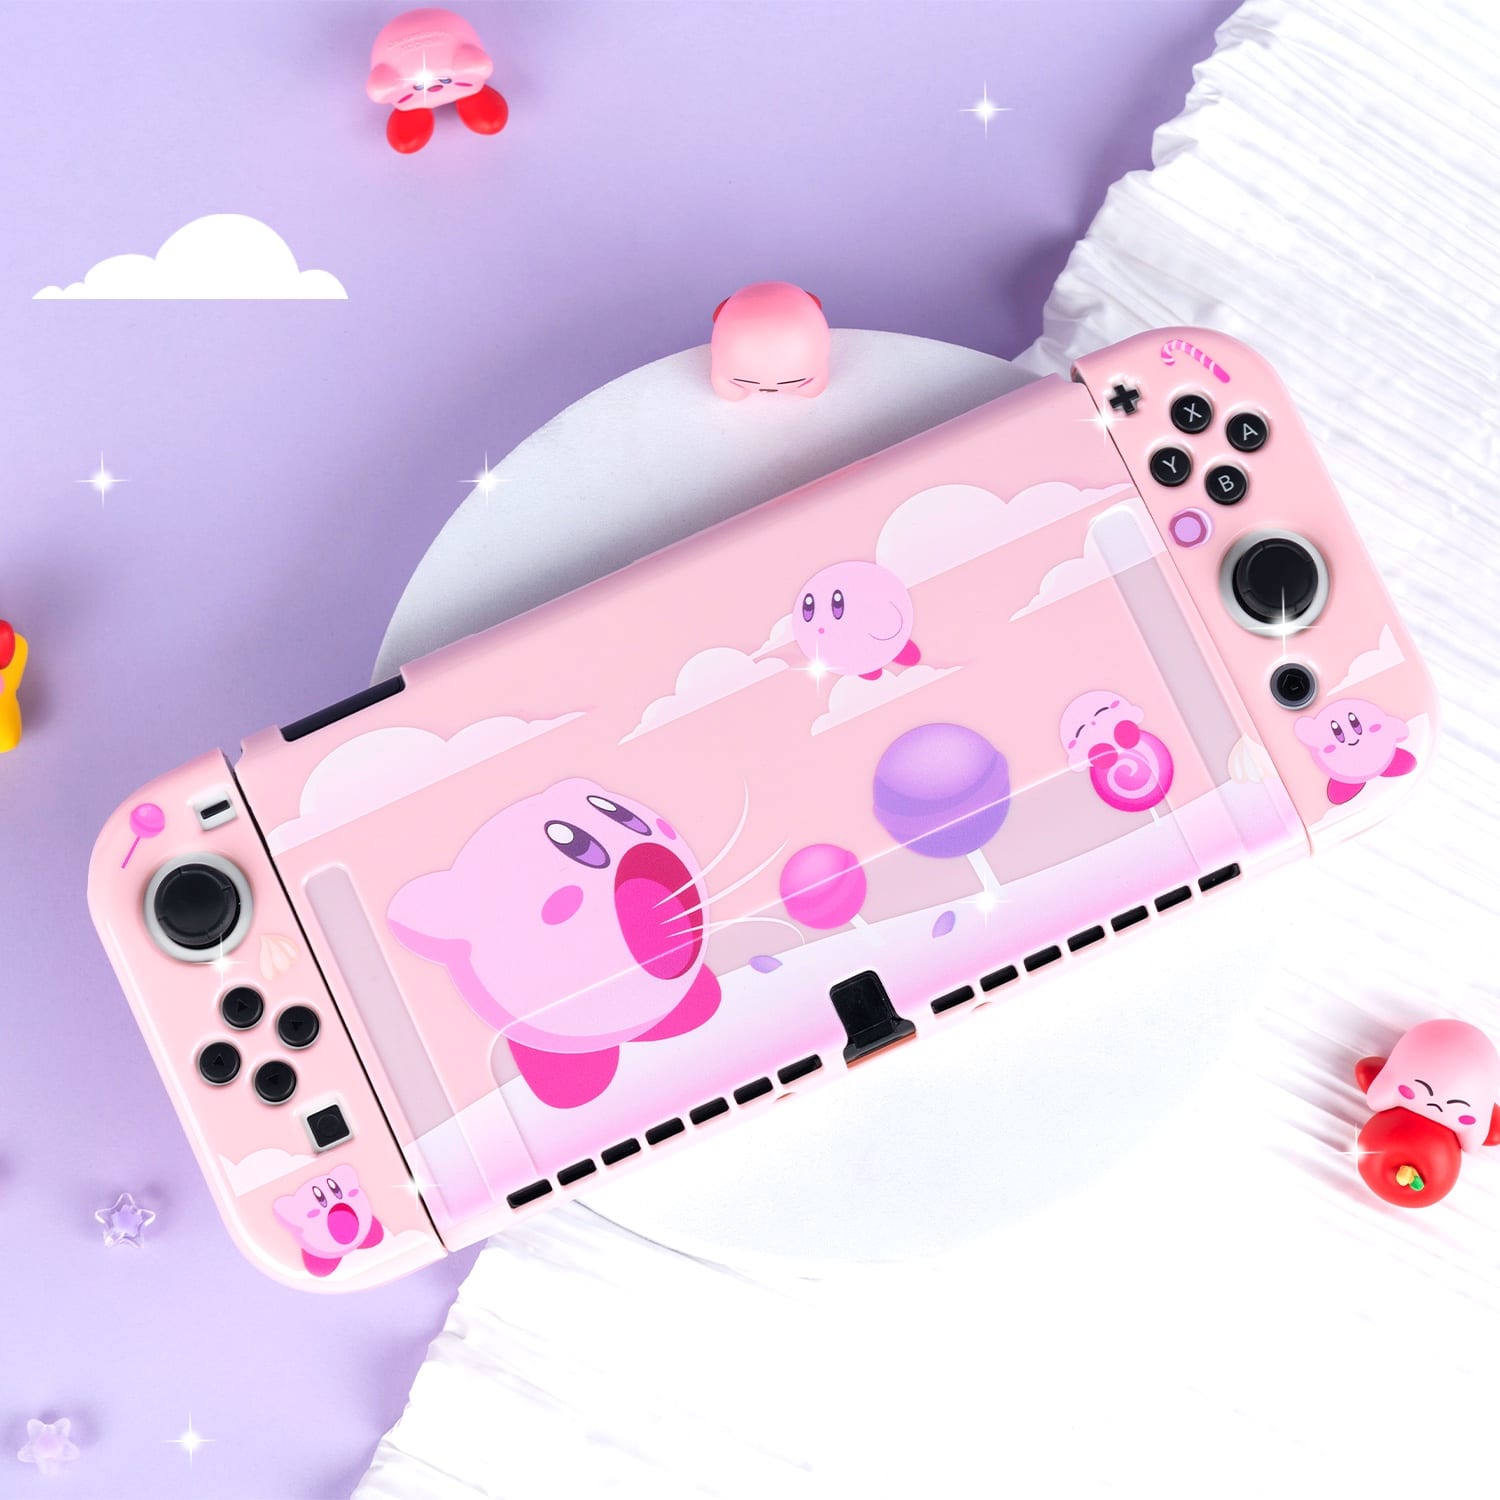 Kirby Case - Pink Anime Cover for Nintendo Switch OLED – Beluga Design